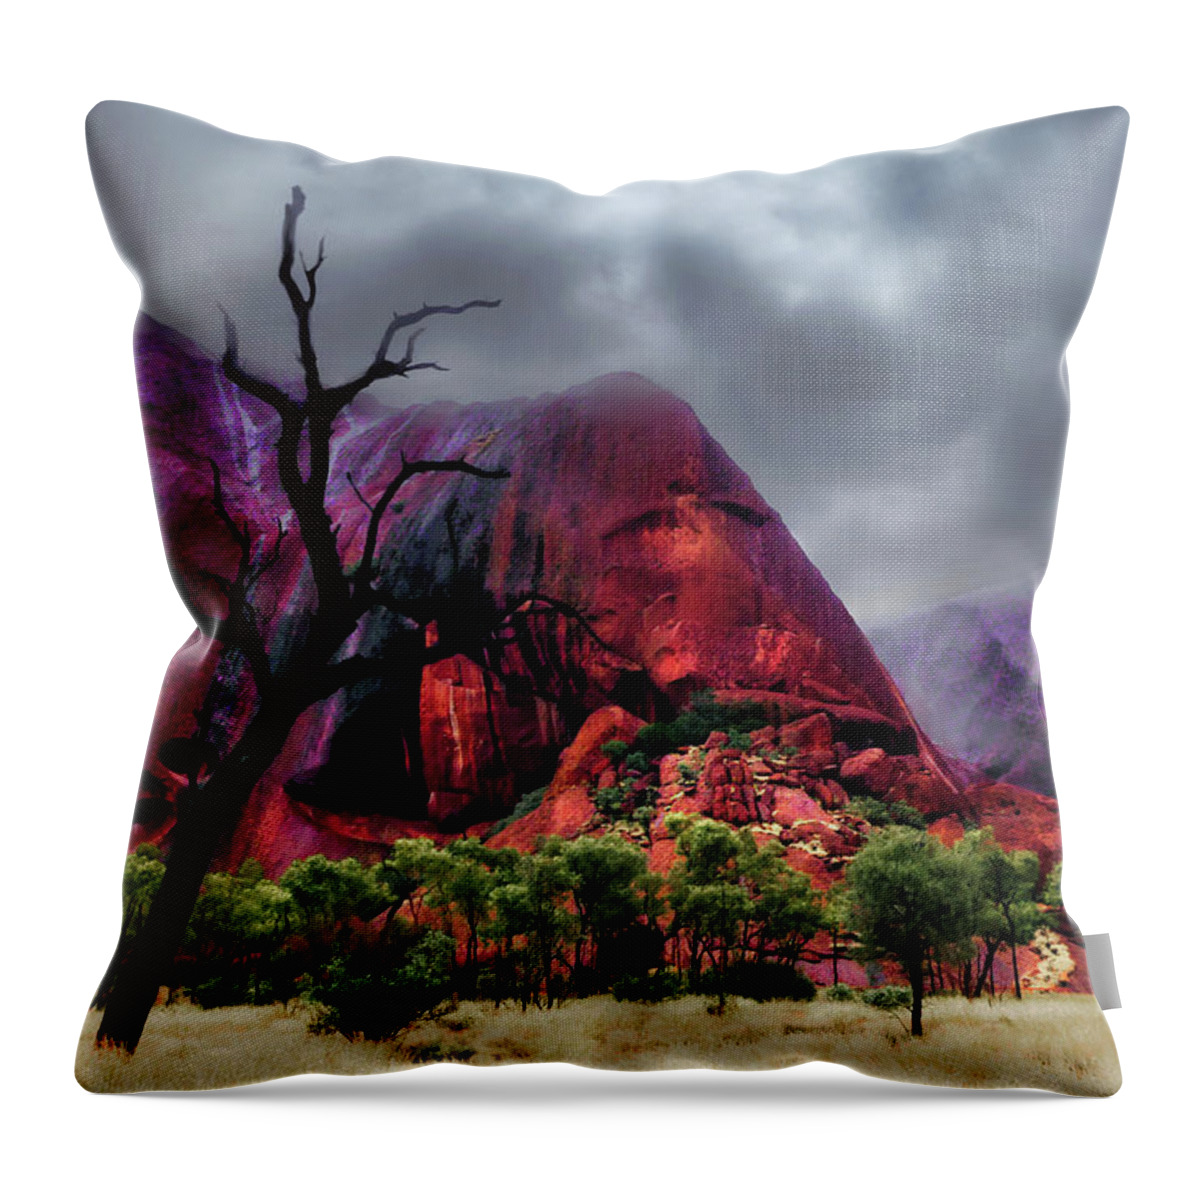 Raw And Untouched Northern Territory Series By Lexa Harpell Throw Pillow featuring the photograph After the Rain - Uluru, Central Australia by Lexa Harpell